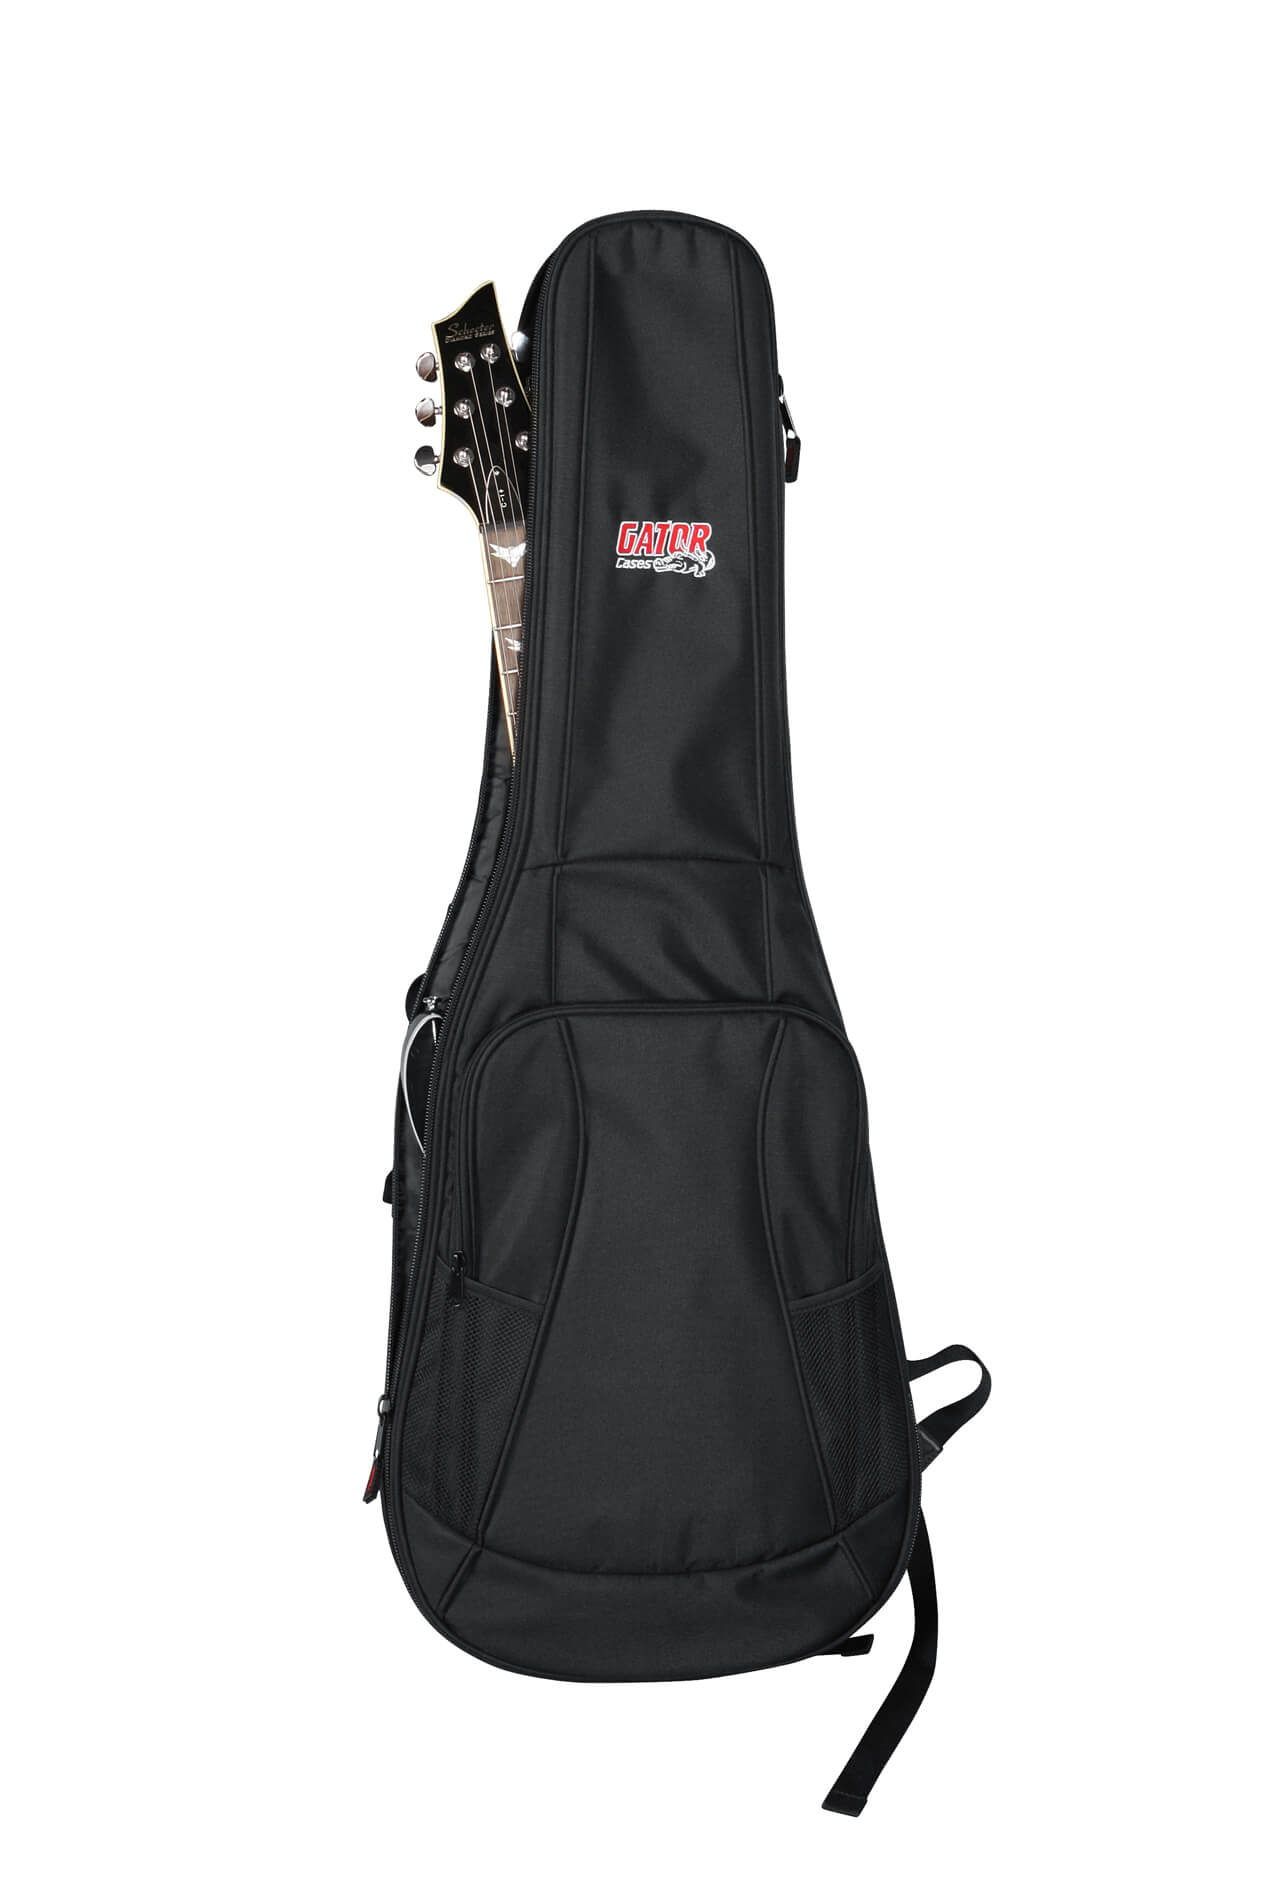 4G Series Gig Bag for Electric Guitars-GB-4G-ELECTRIC